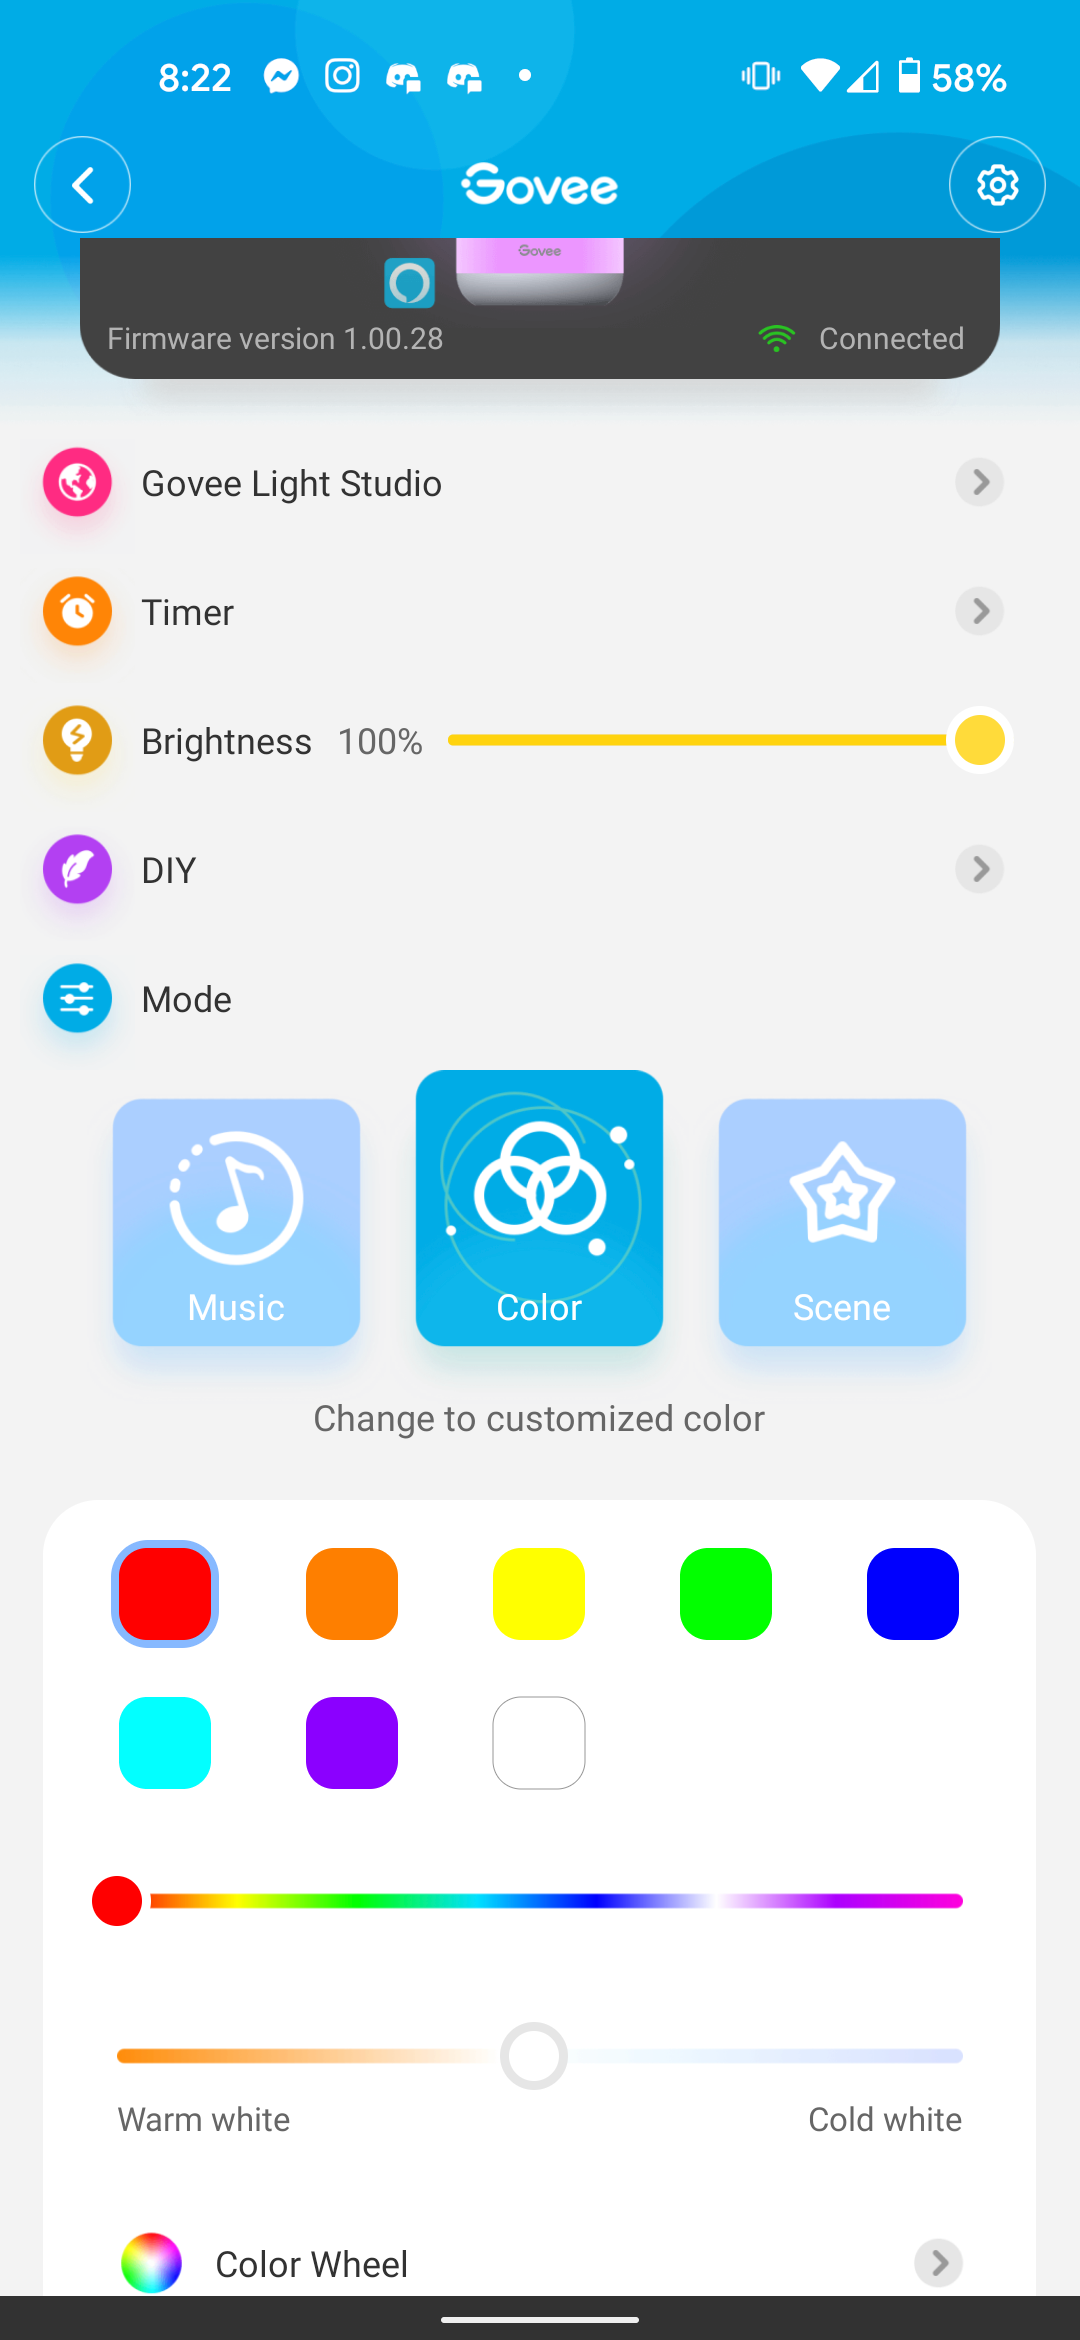 The Govee app showing the solid color option for the Aura Lamp